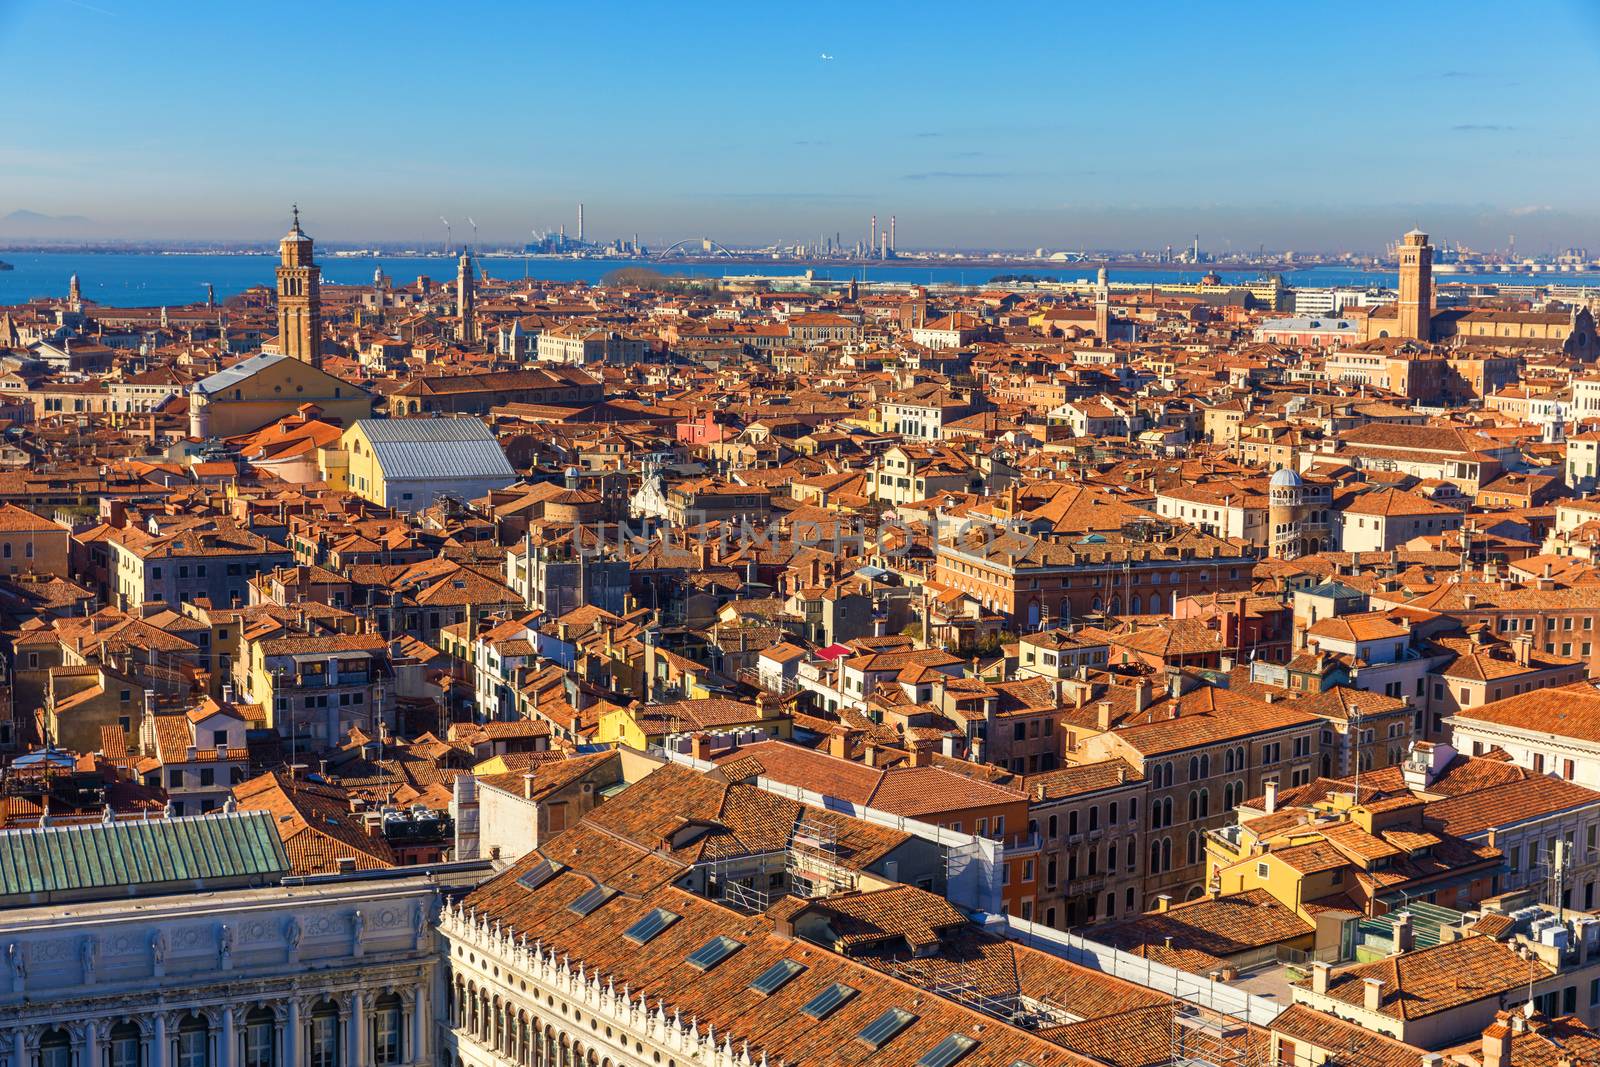 Venice panoramic aerial view with red roofs, Veneto, Italy. Aeri by DaLiu